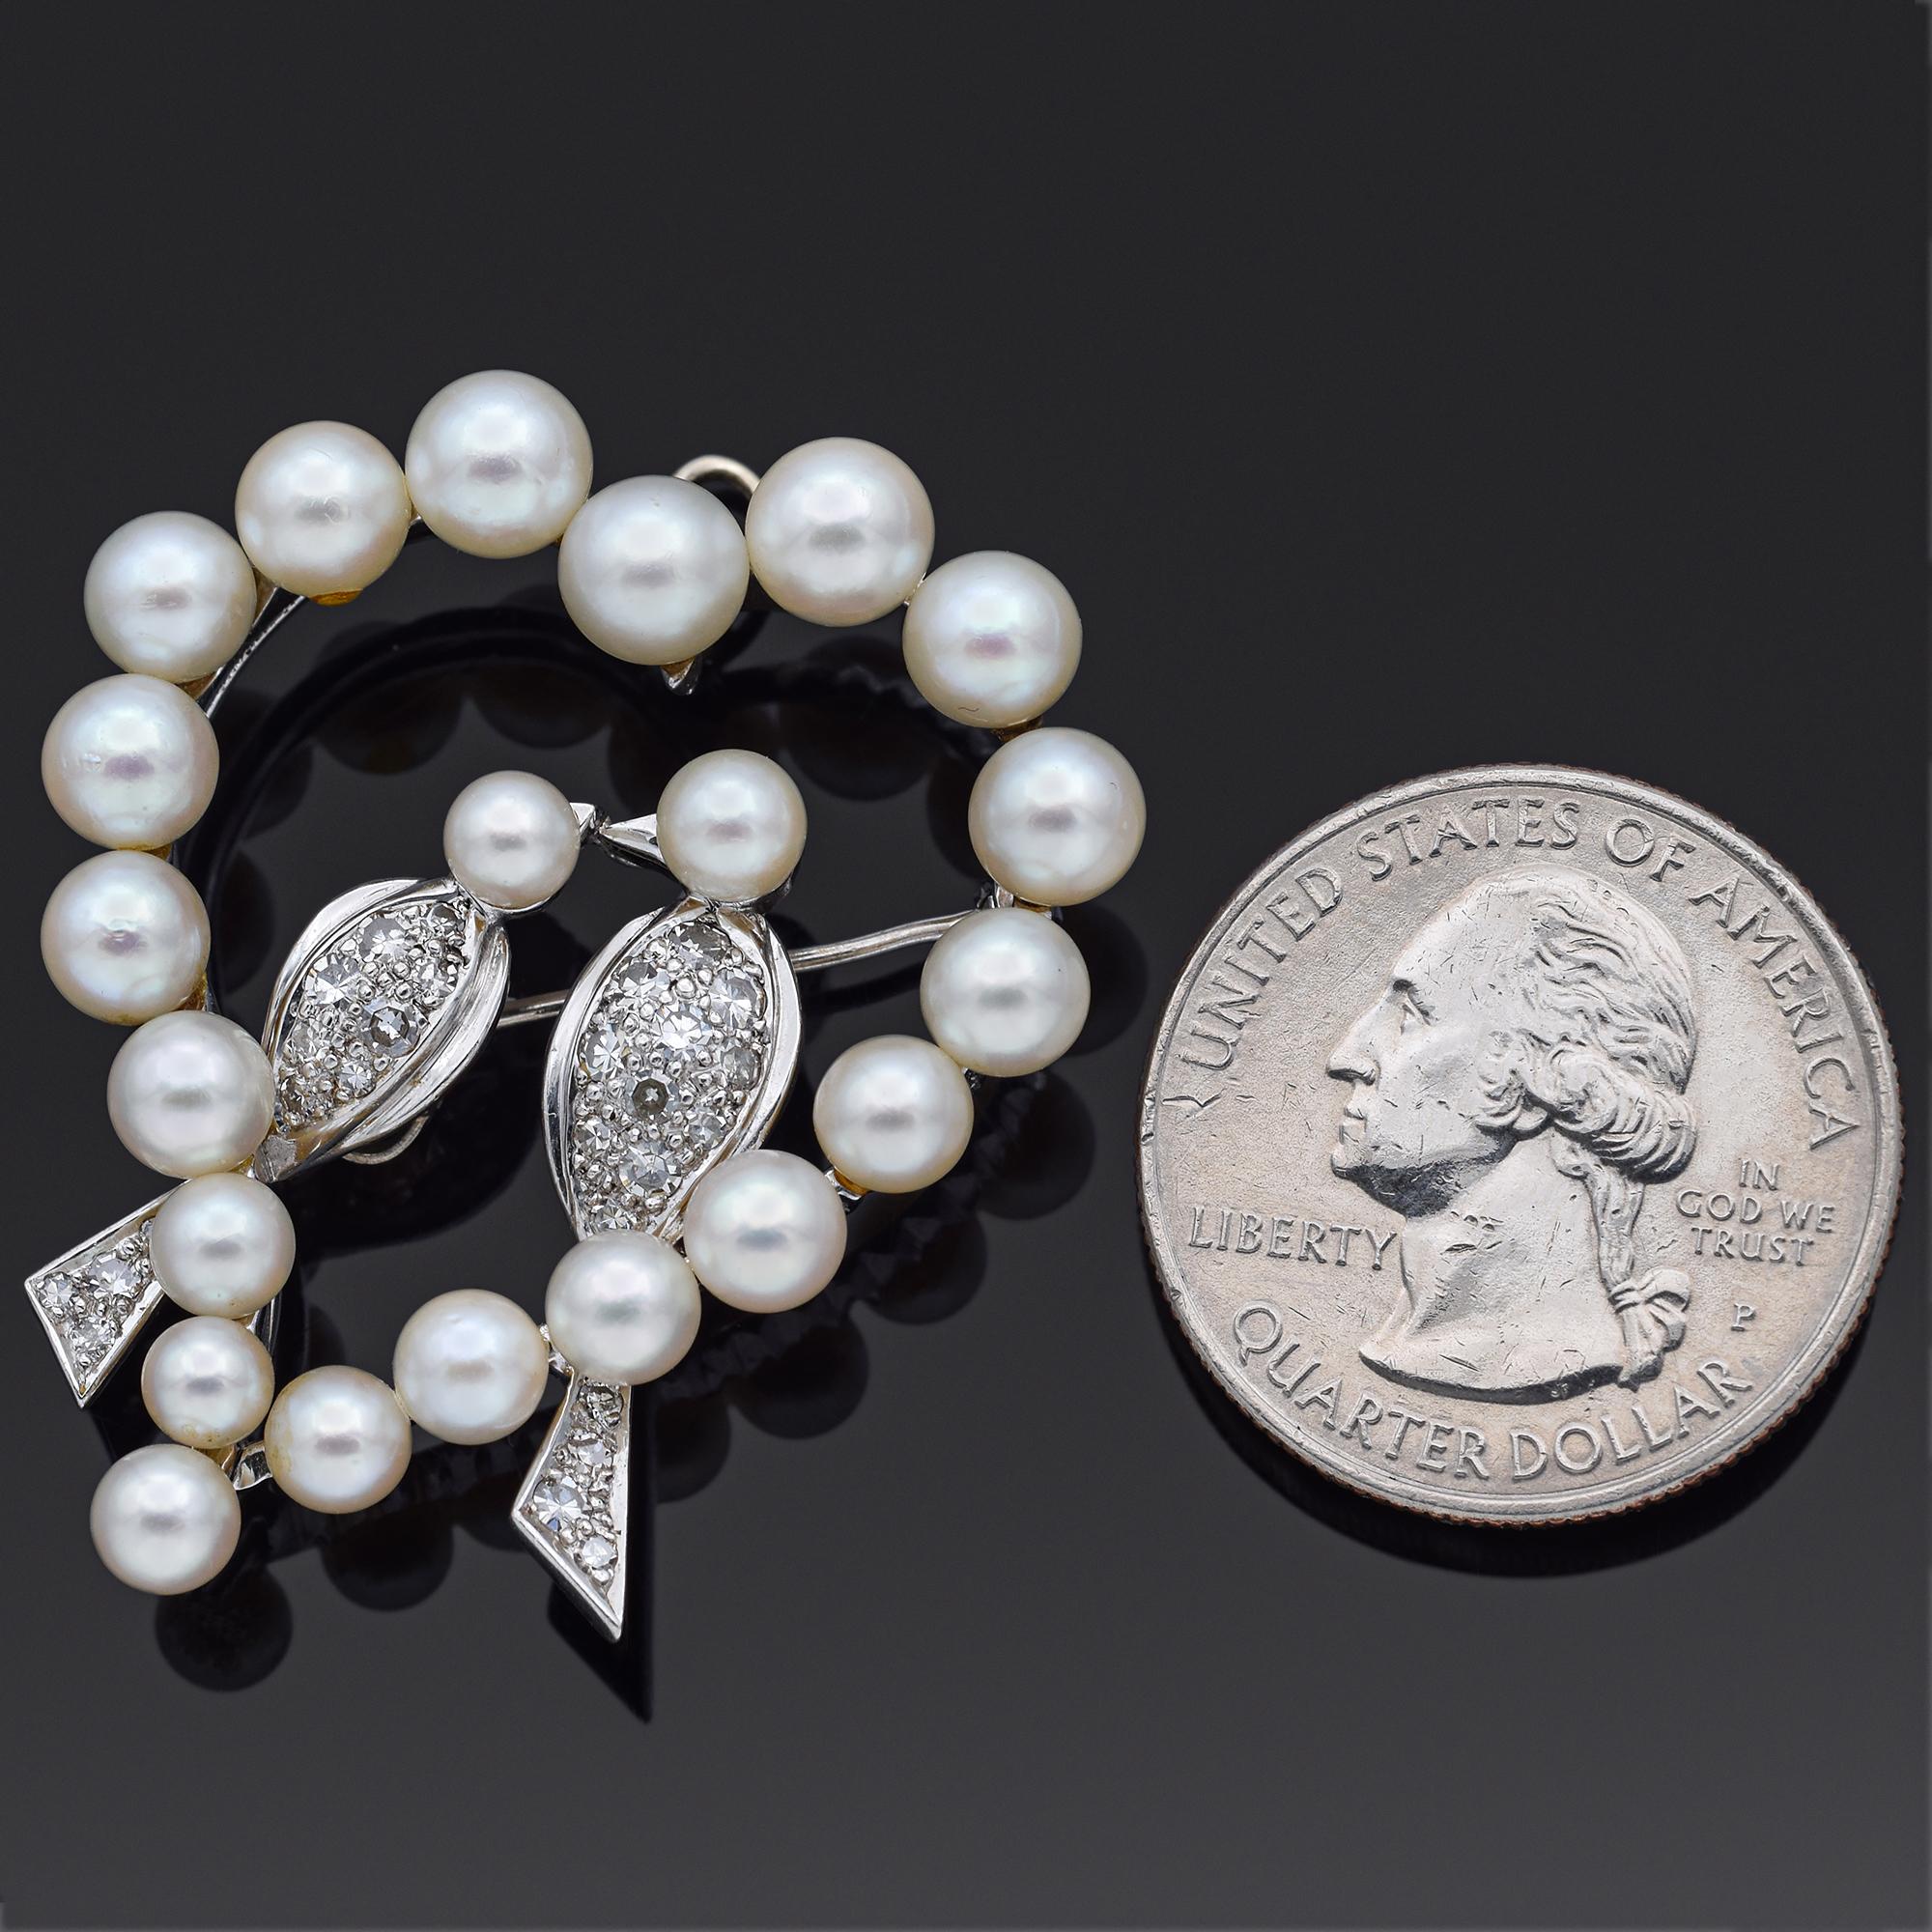 Weight:  12.4 Grams
Stone: Pearl (4-6 mm) & Approx 0.68 TCW (0.015-0.03 ct) Diamonds
Measurements: 40 x 35 mm
Hallmark: 14K Tested

ITEM #: BR-1077-101823-10